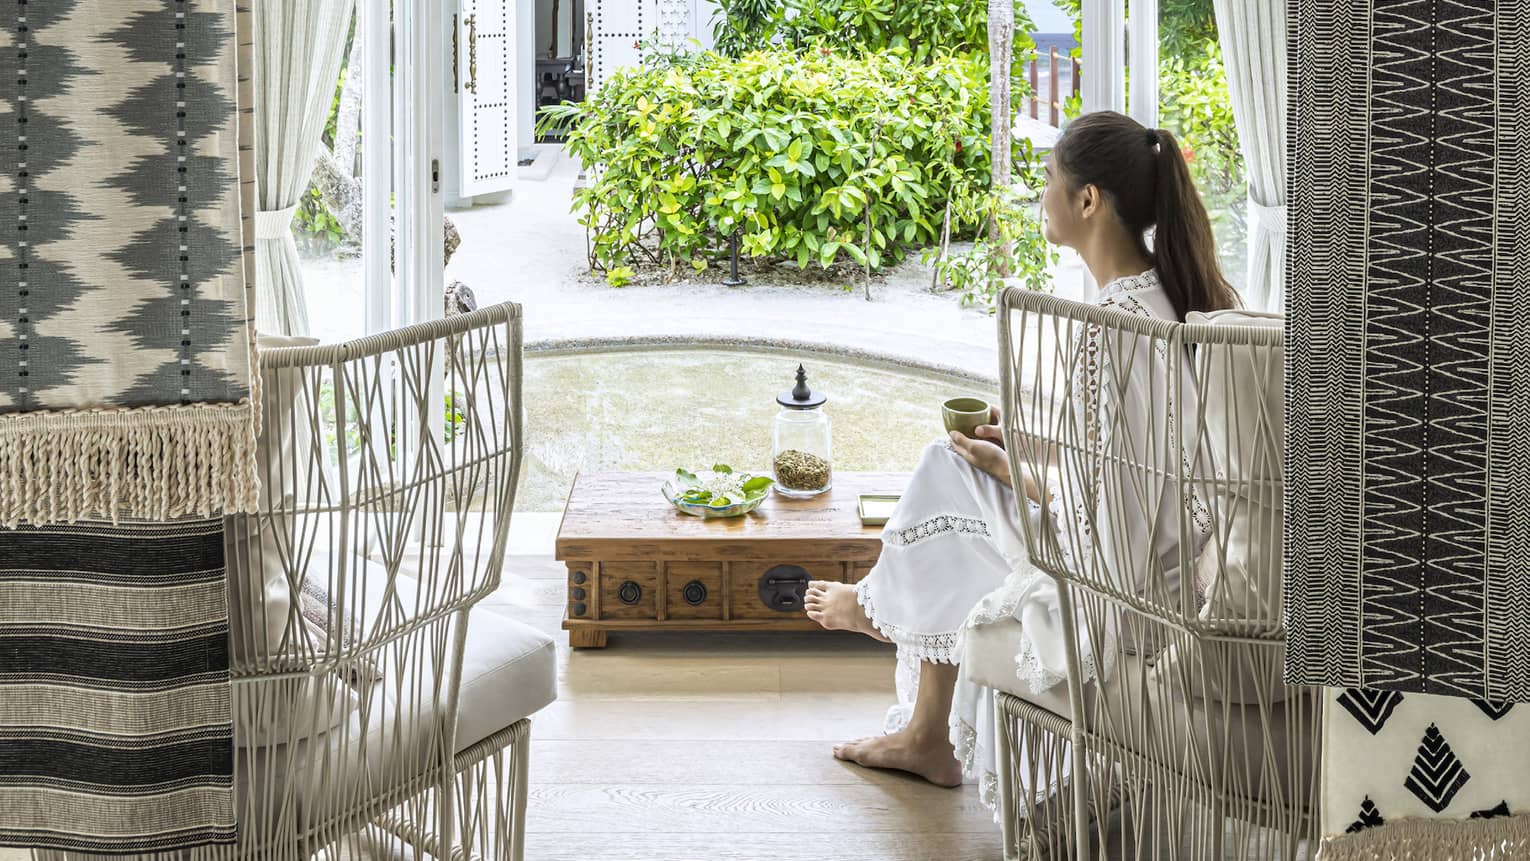 A woman sits in white wicker chair in the four seasons maldives spa waiting area and overlooks the garden outside an opened window